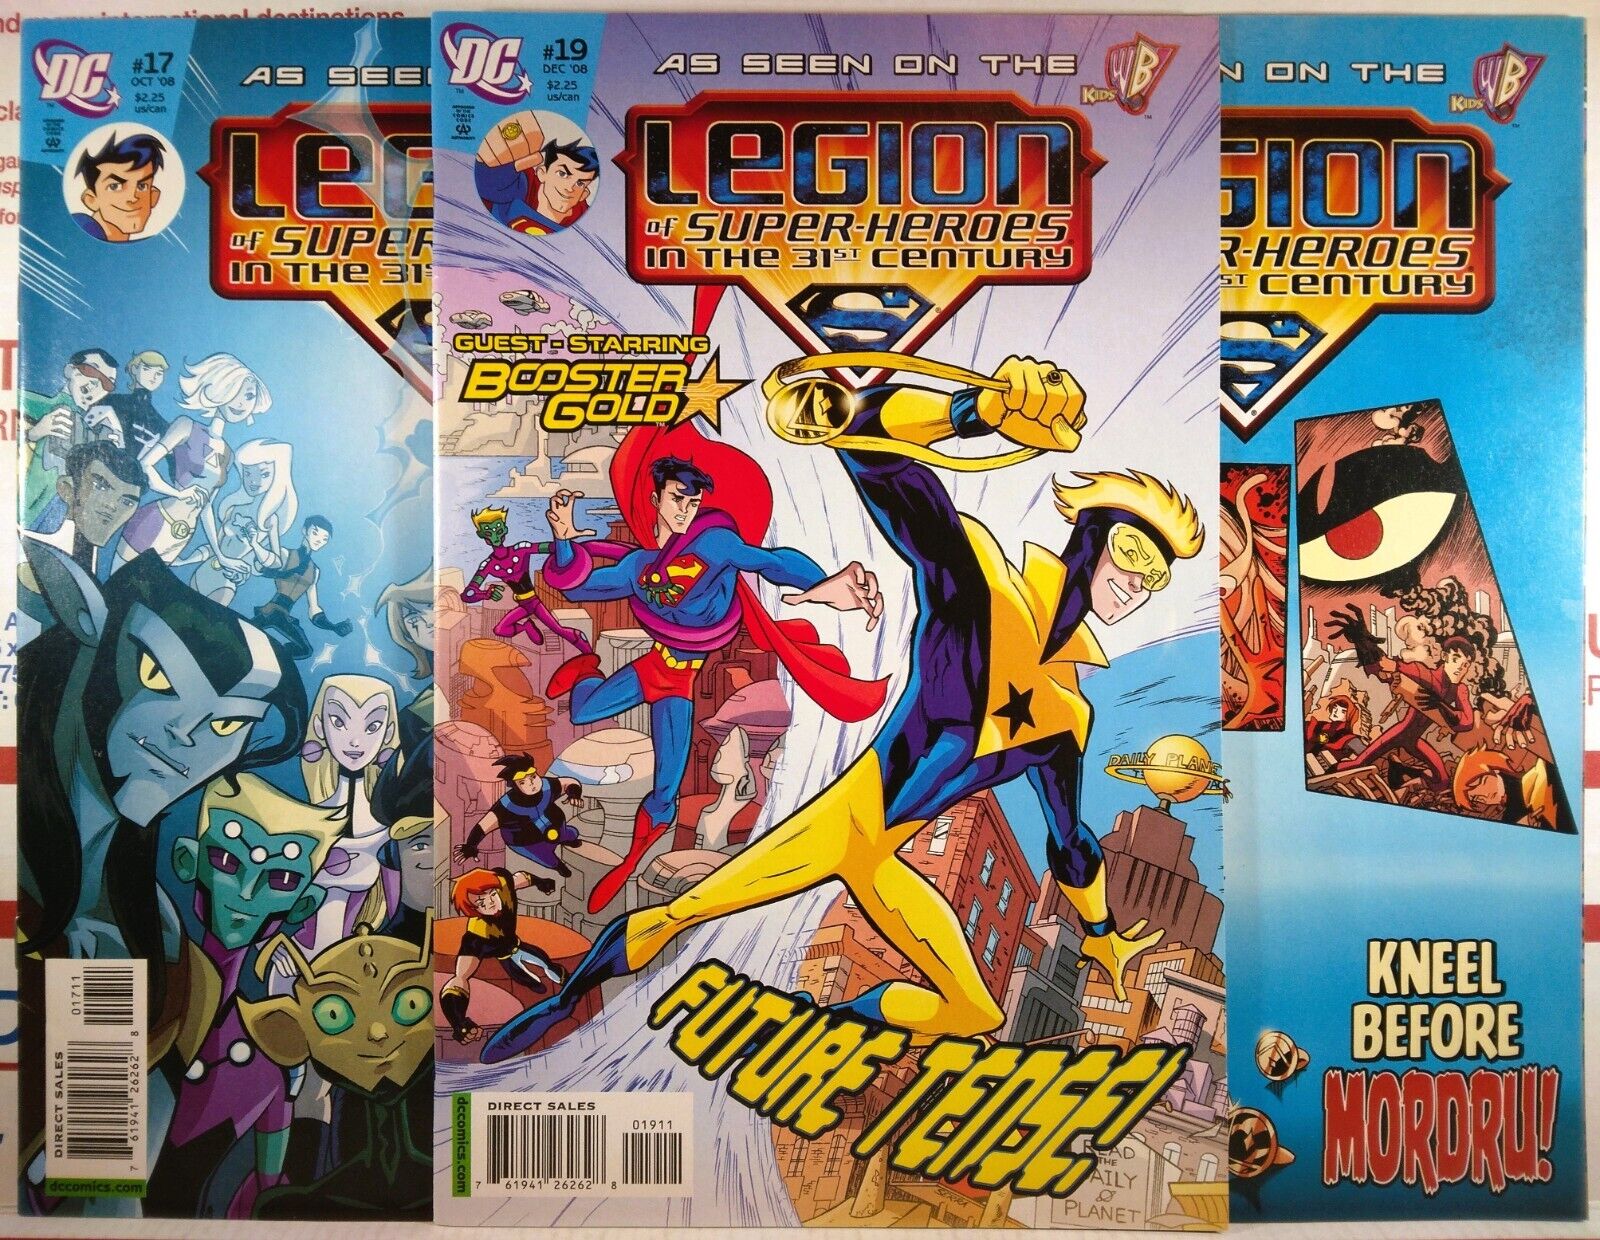 💥 LEGION OF SUPER-HEROES IN THE 31st CENTURY #17 #18 #19 BOOSTER GOLD SUPERBOY